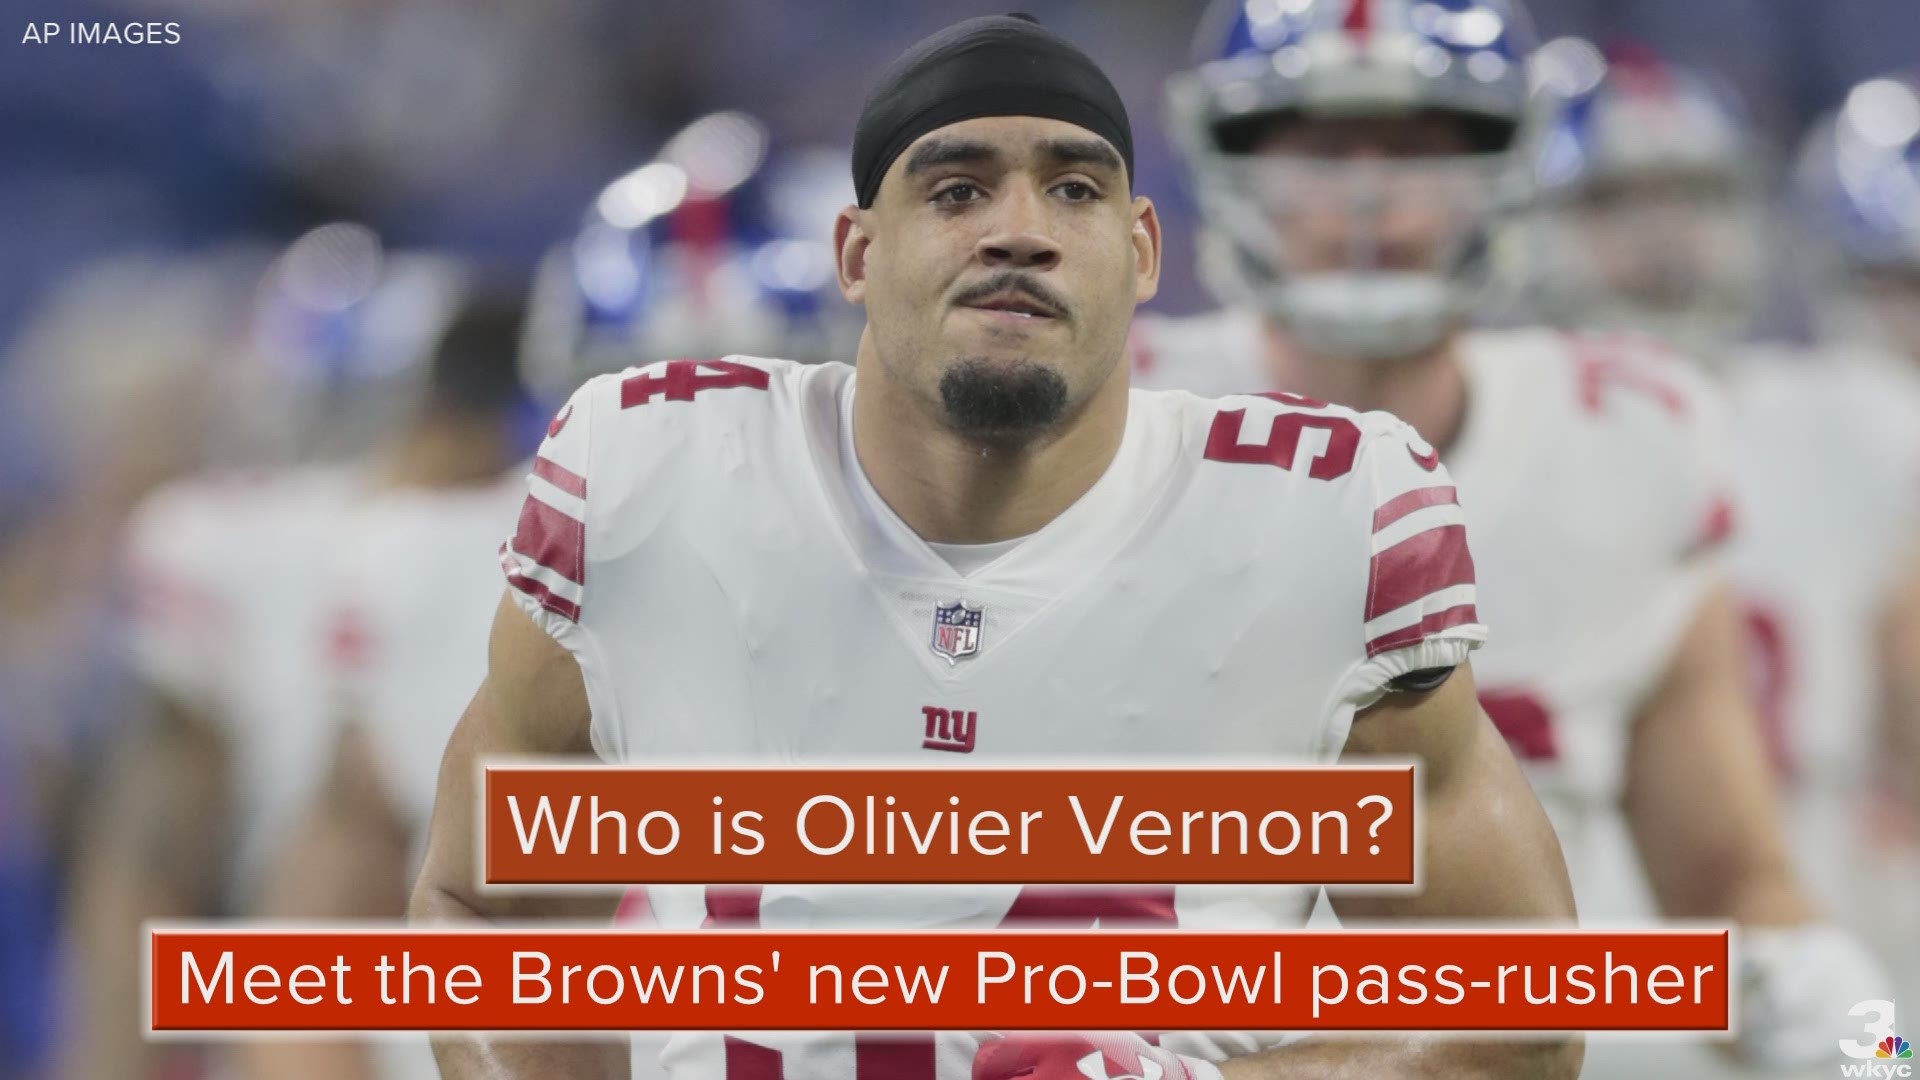 On Friday, the Cleveland Browns reportedly agreed to trade guard Kevin Zeitler to the New York Giants in exchange for Pro Bowl edge rusher Olivier Vernon.